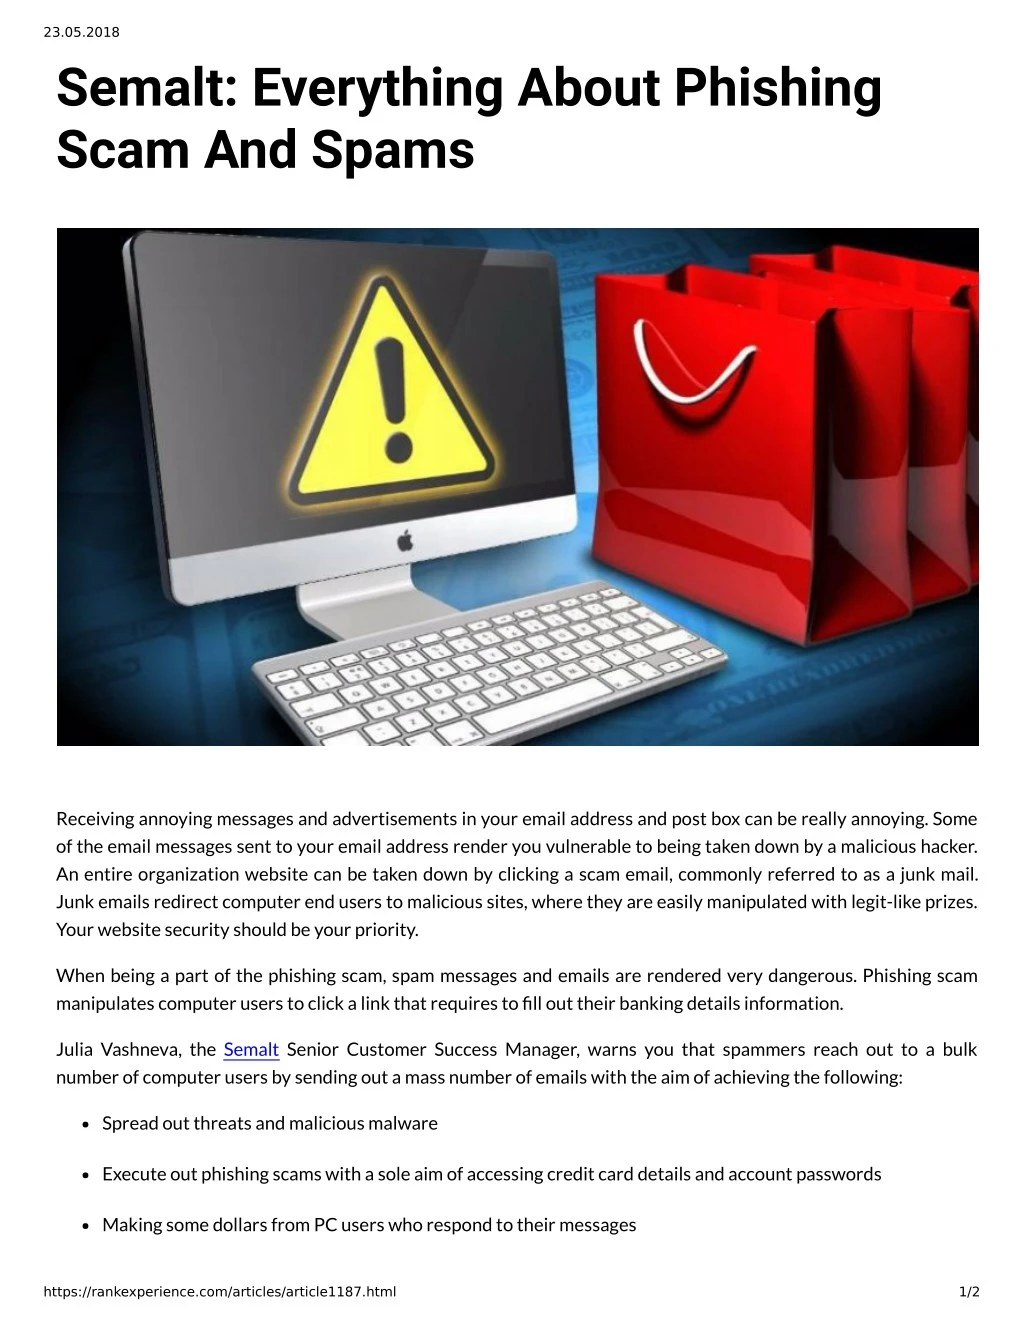 23 05 2018 semalt everything about phishing scam